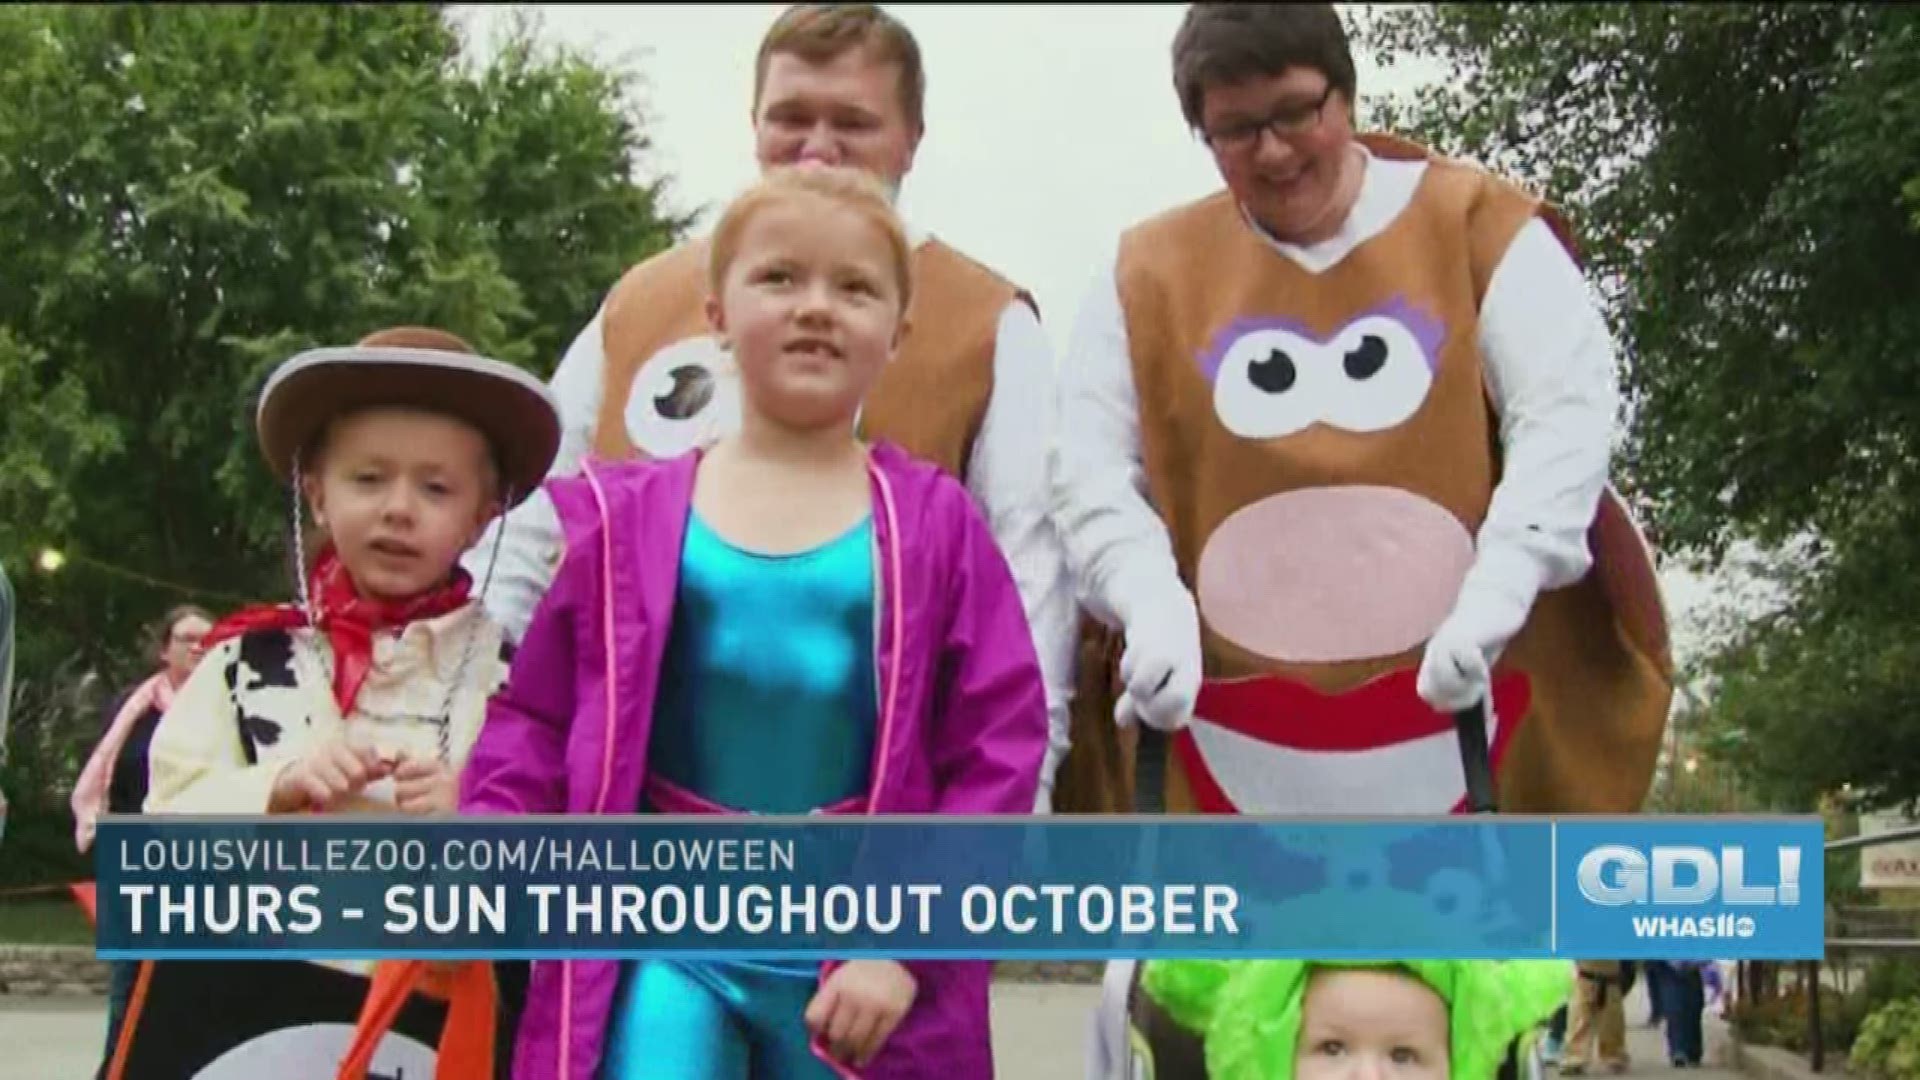 Trick-or-treating is going on every week in October at the World's Largest Halloween Party at the Louisville Zoo.